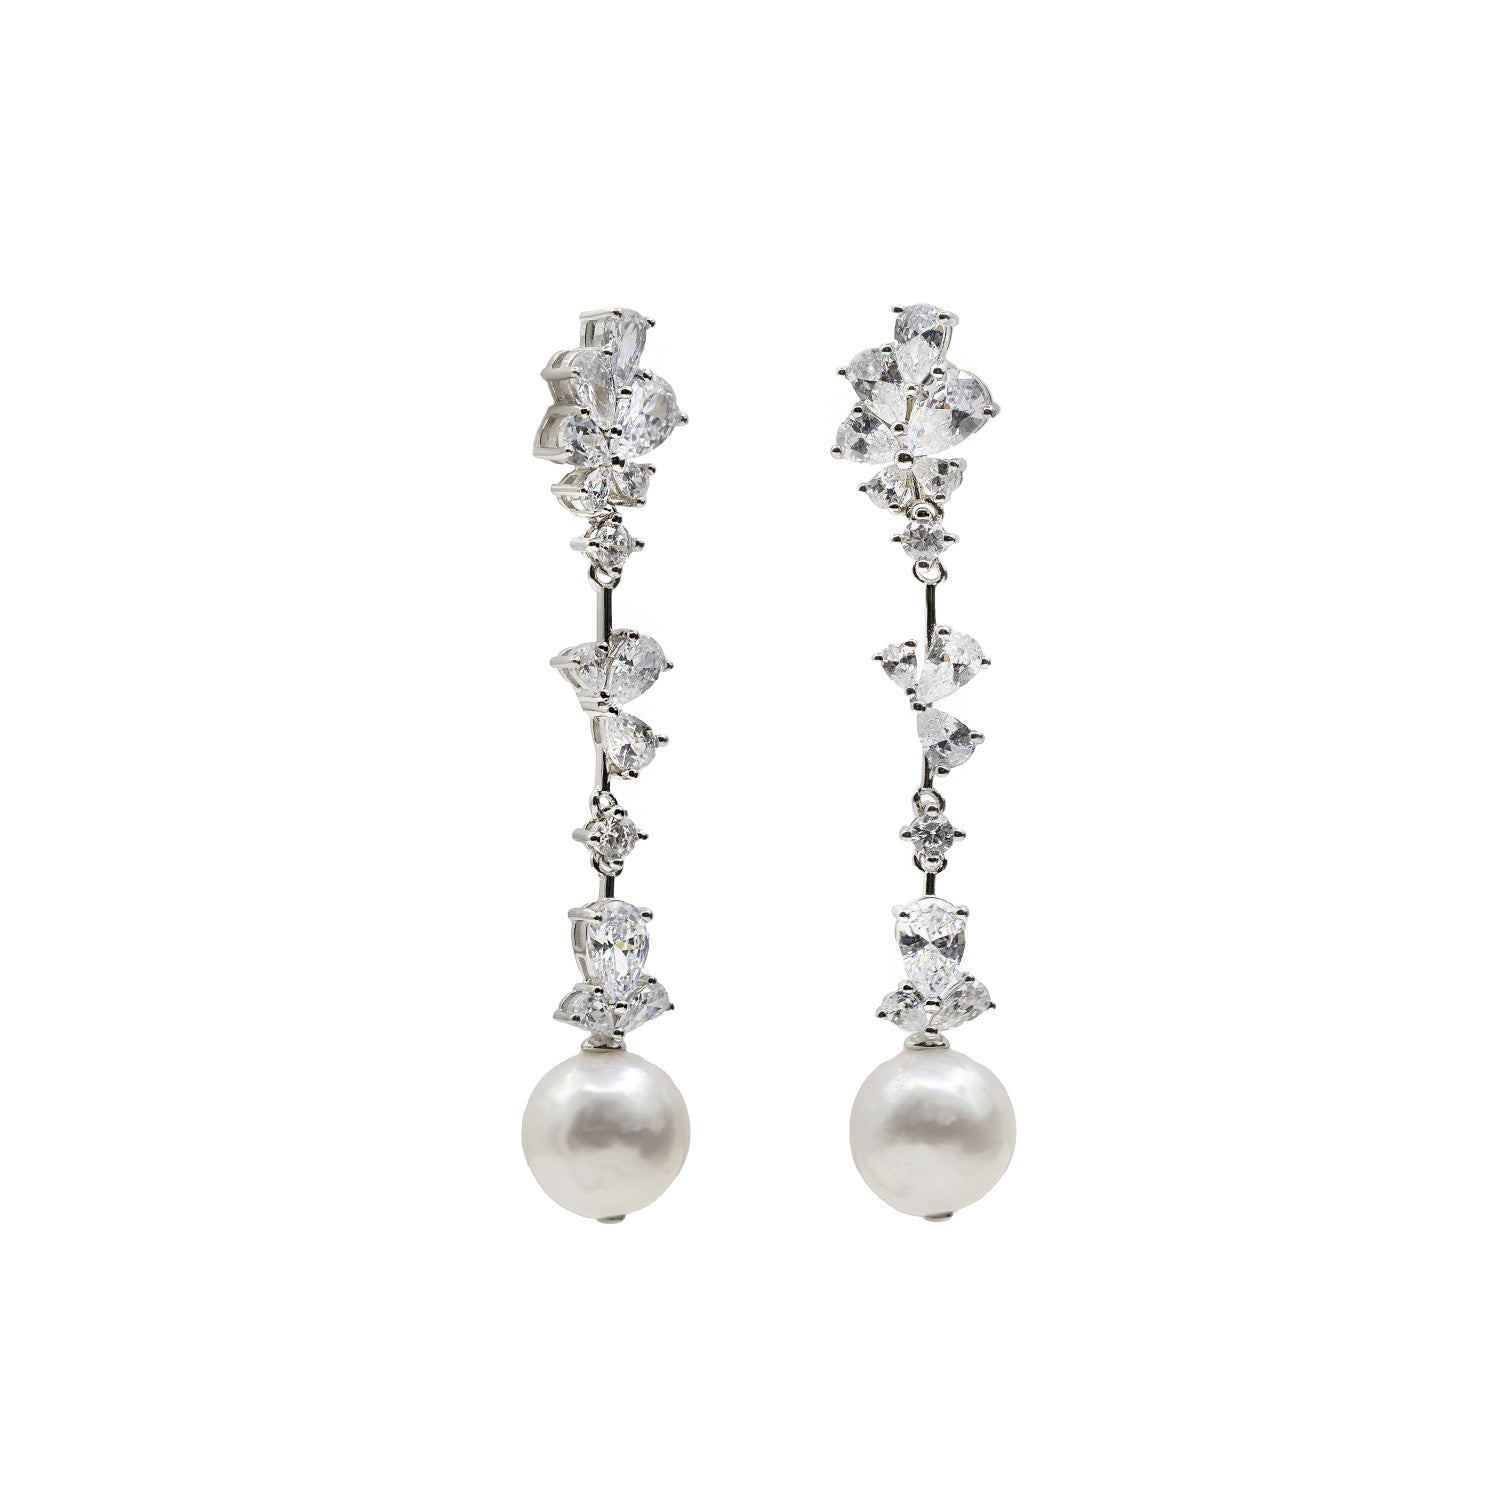 Long bridal earrings with zirconia and finished with a pearl in floral motifs